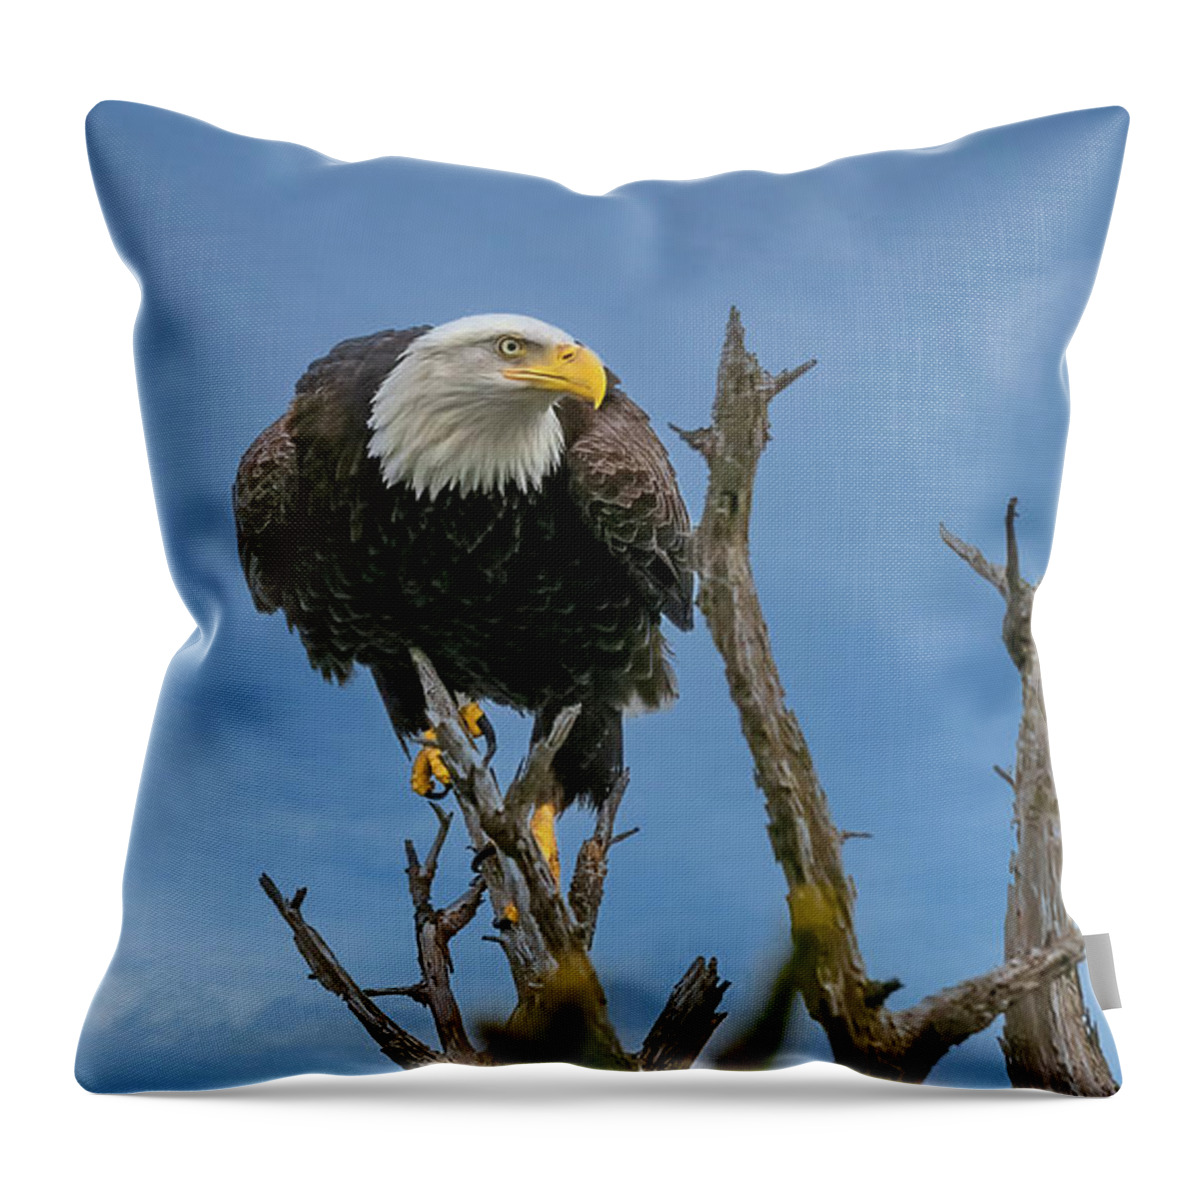 Eagle Got My Eye On You Throw Pillow featuring the photograph Eagle Got My Eye On You by David Millenheft